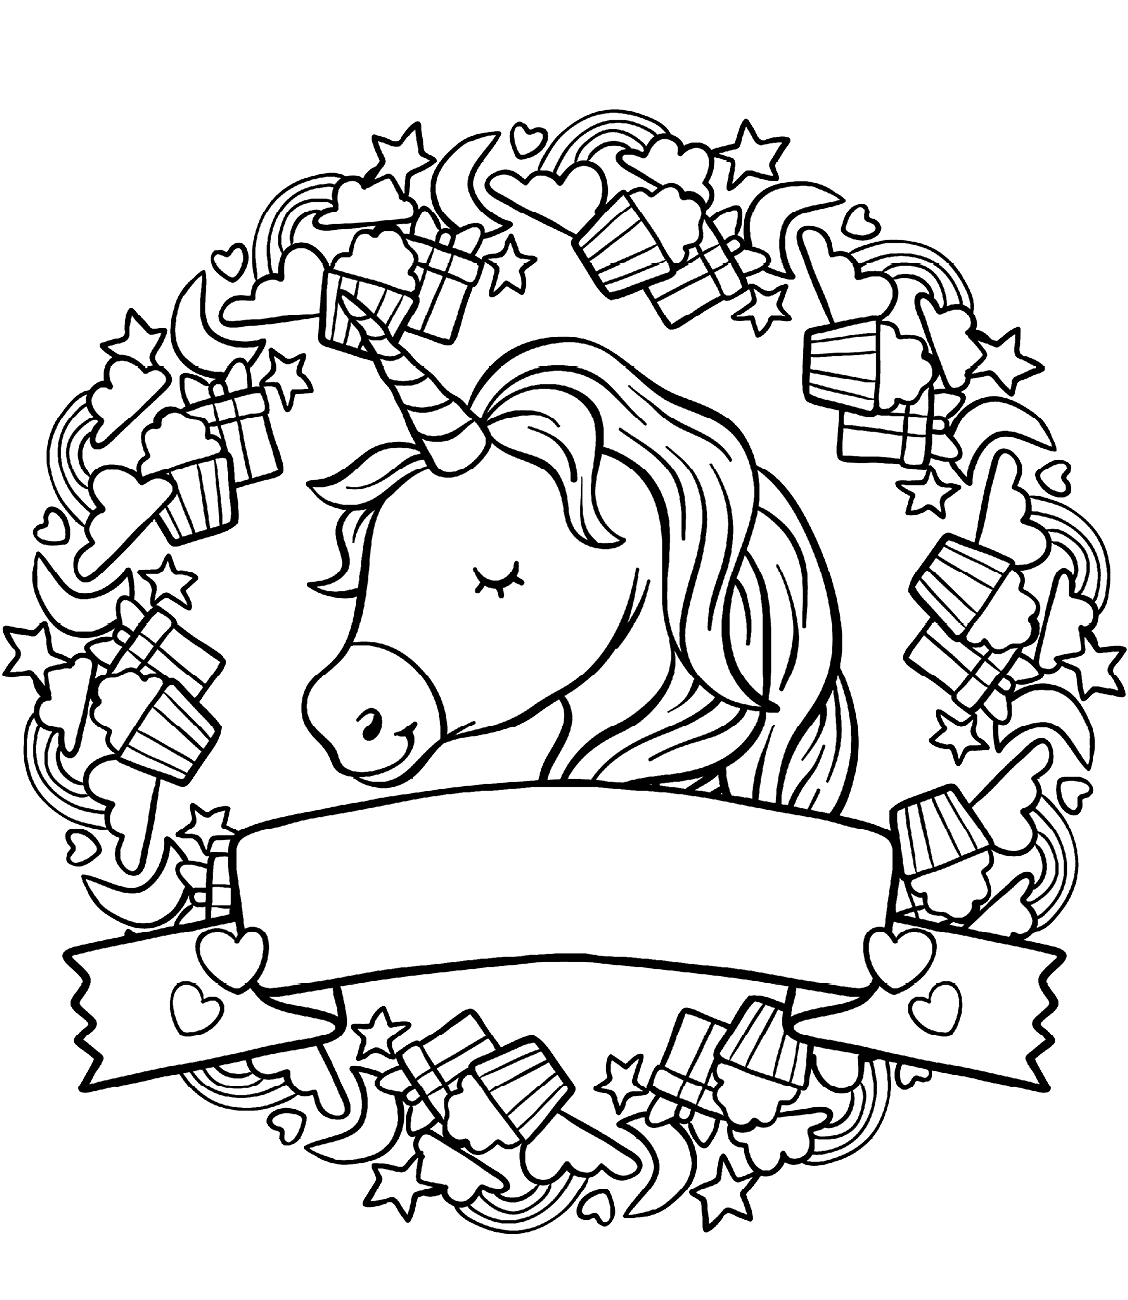 Happy Face Unicorn Coloring Page - Free Printable Coloring Pages for Kids